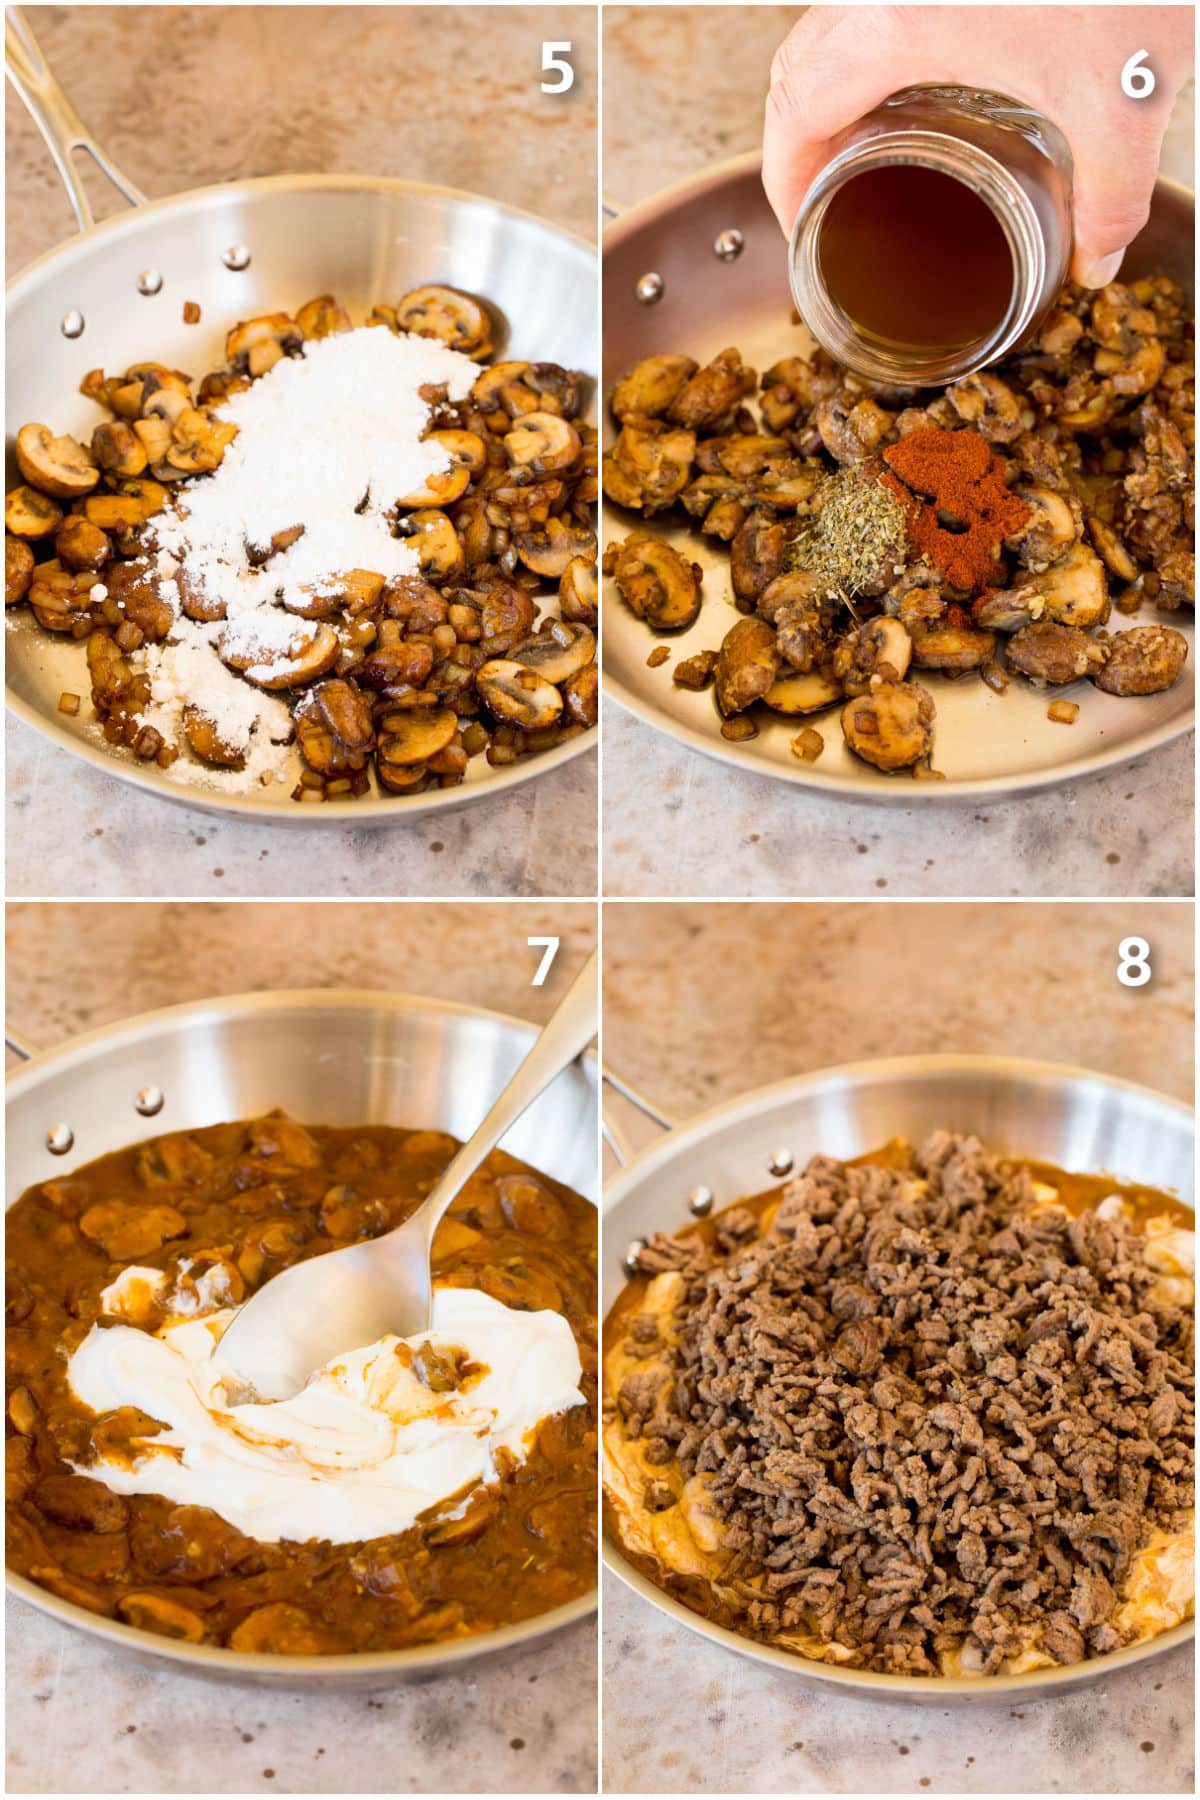 Process shots showing how to make ground beef stroganoff.